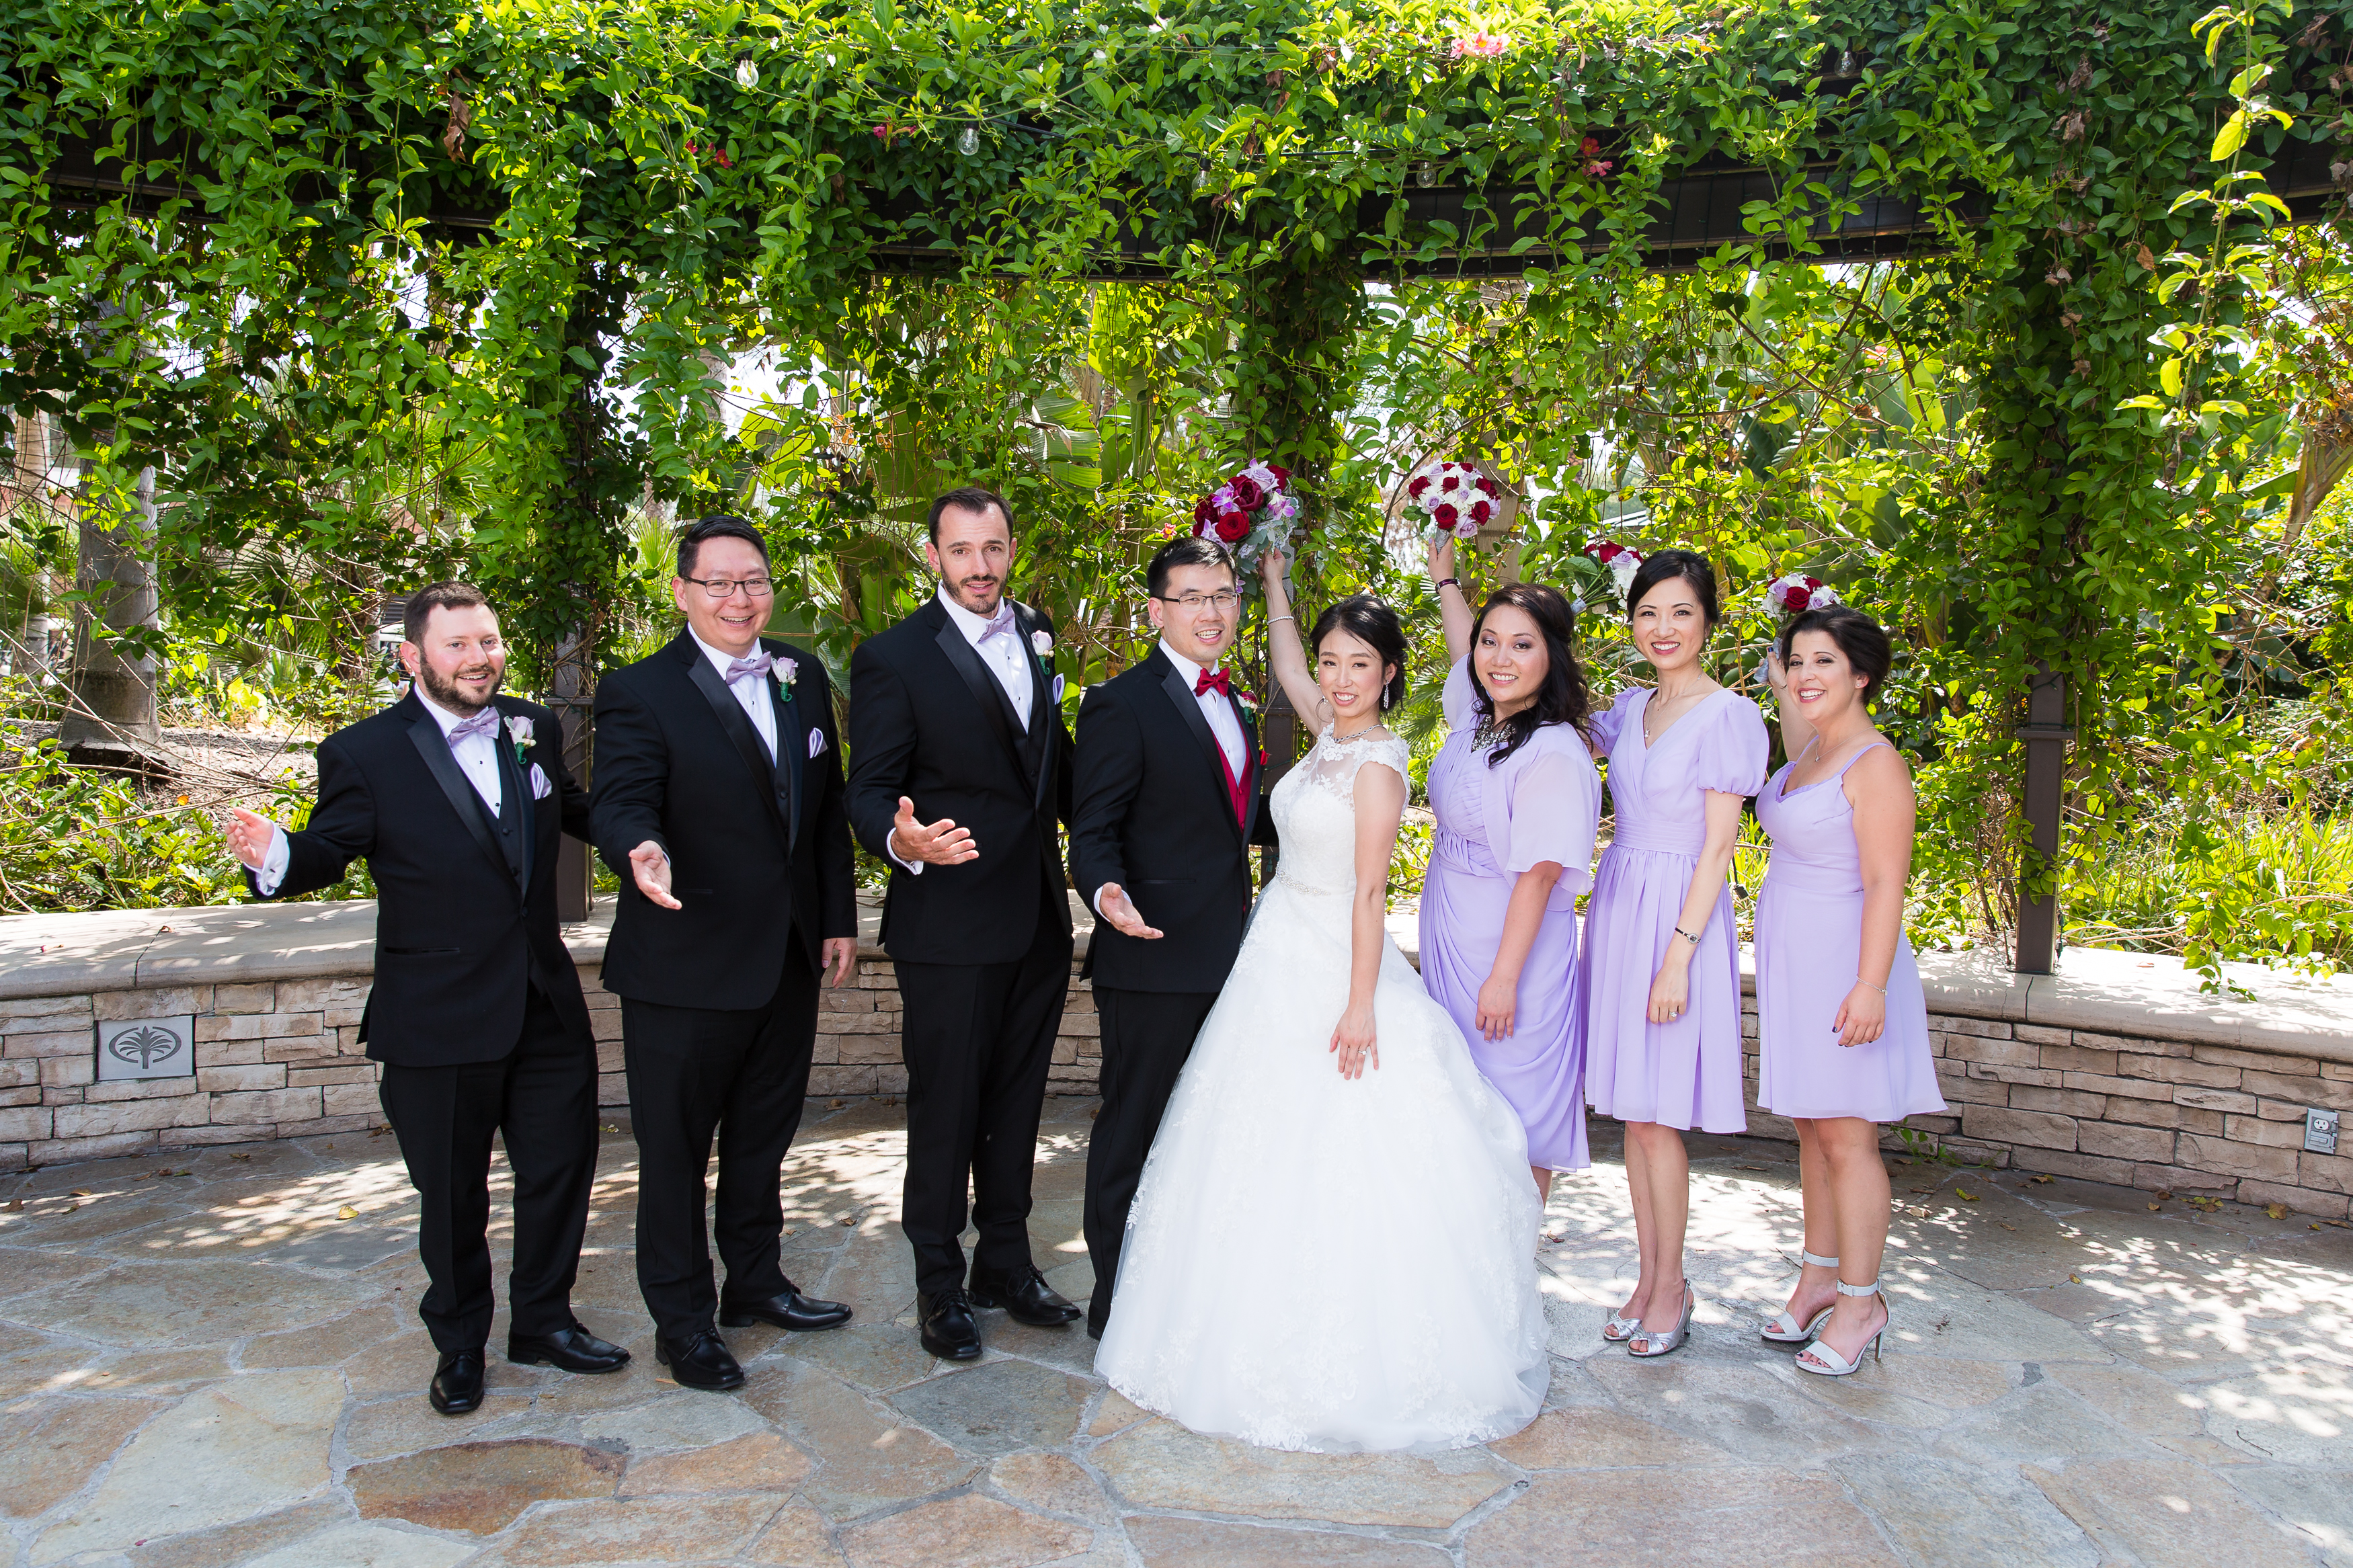 Bridesmaids and groomsmen celebrating couple's marriage